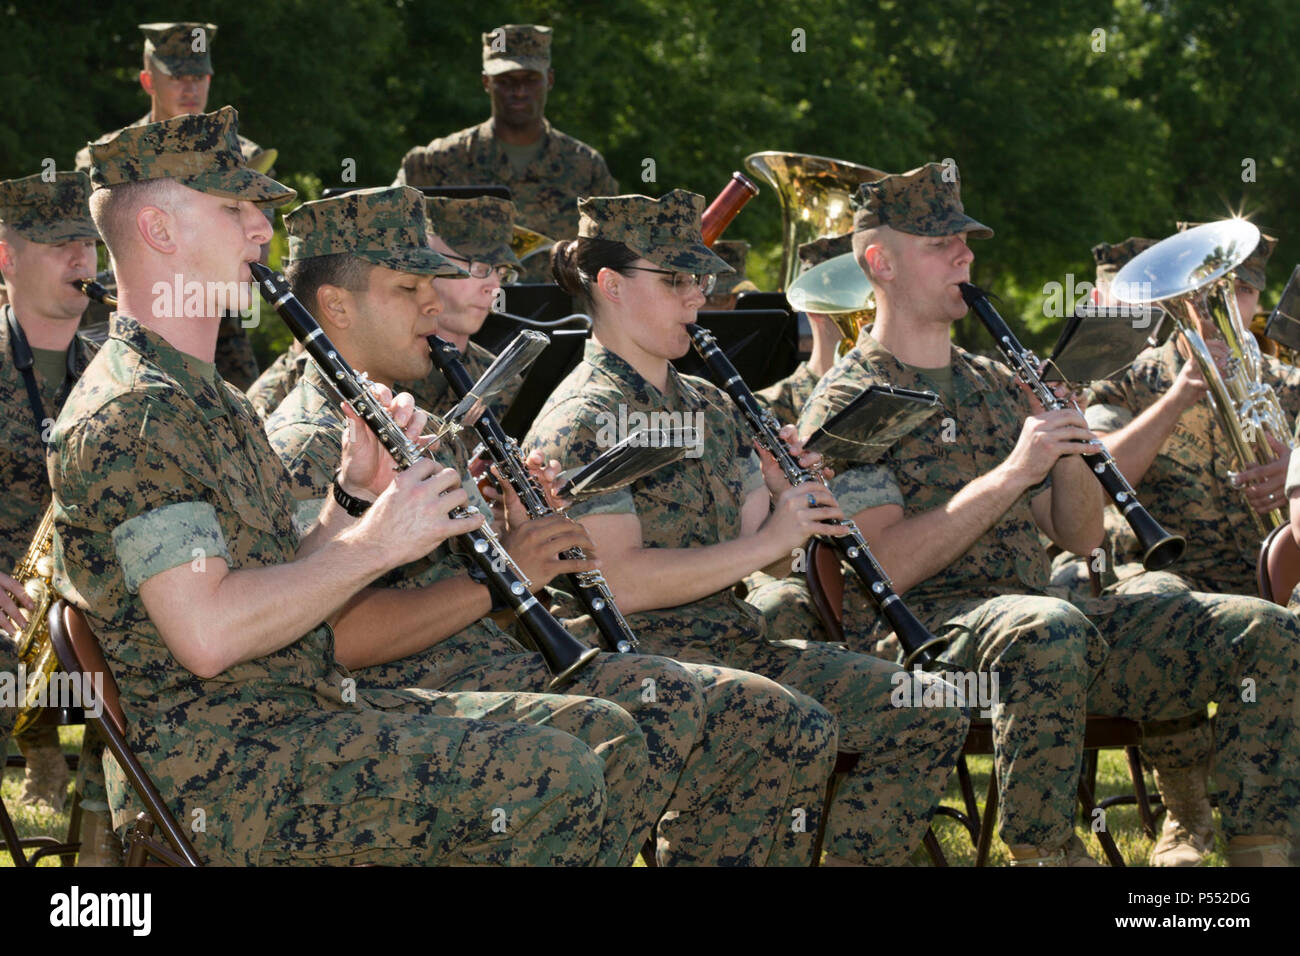 The U.S. Marine Corps Quantico band performs during the Centennial Celebration Ceremony at Lejeune Field, Marine Corps Base (MCB) Quantico, Va., May 10, 2017. The event commemorates the founding of MCB Quantico in 1917, and consisted of performances by the U.S. Marine Corps Silent Drill Platoon and the U.S. Marine Drum & Bugle Corps. Stock Photo